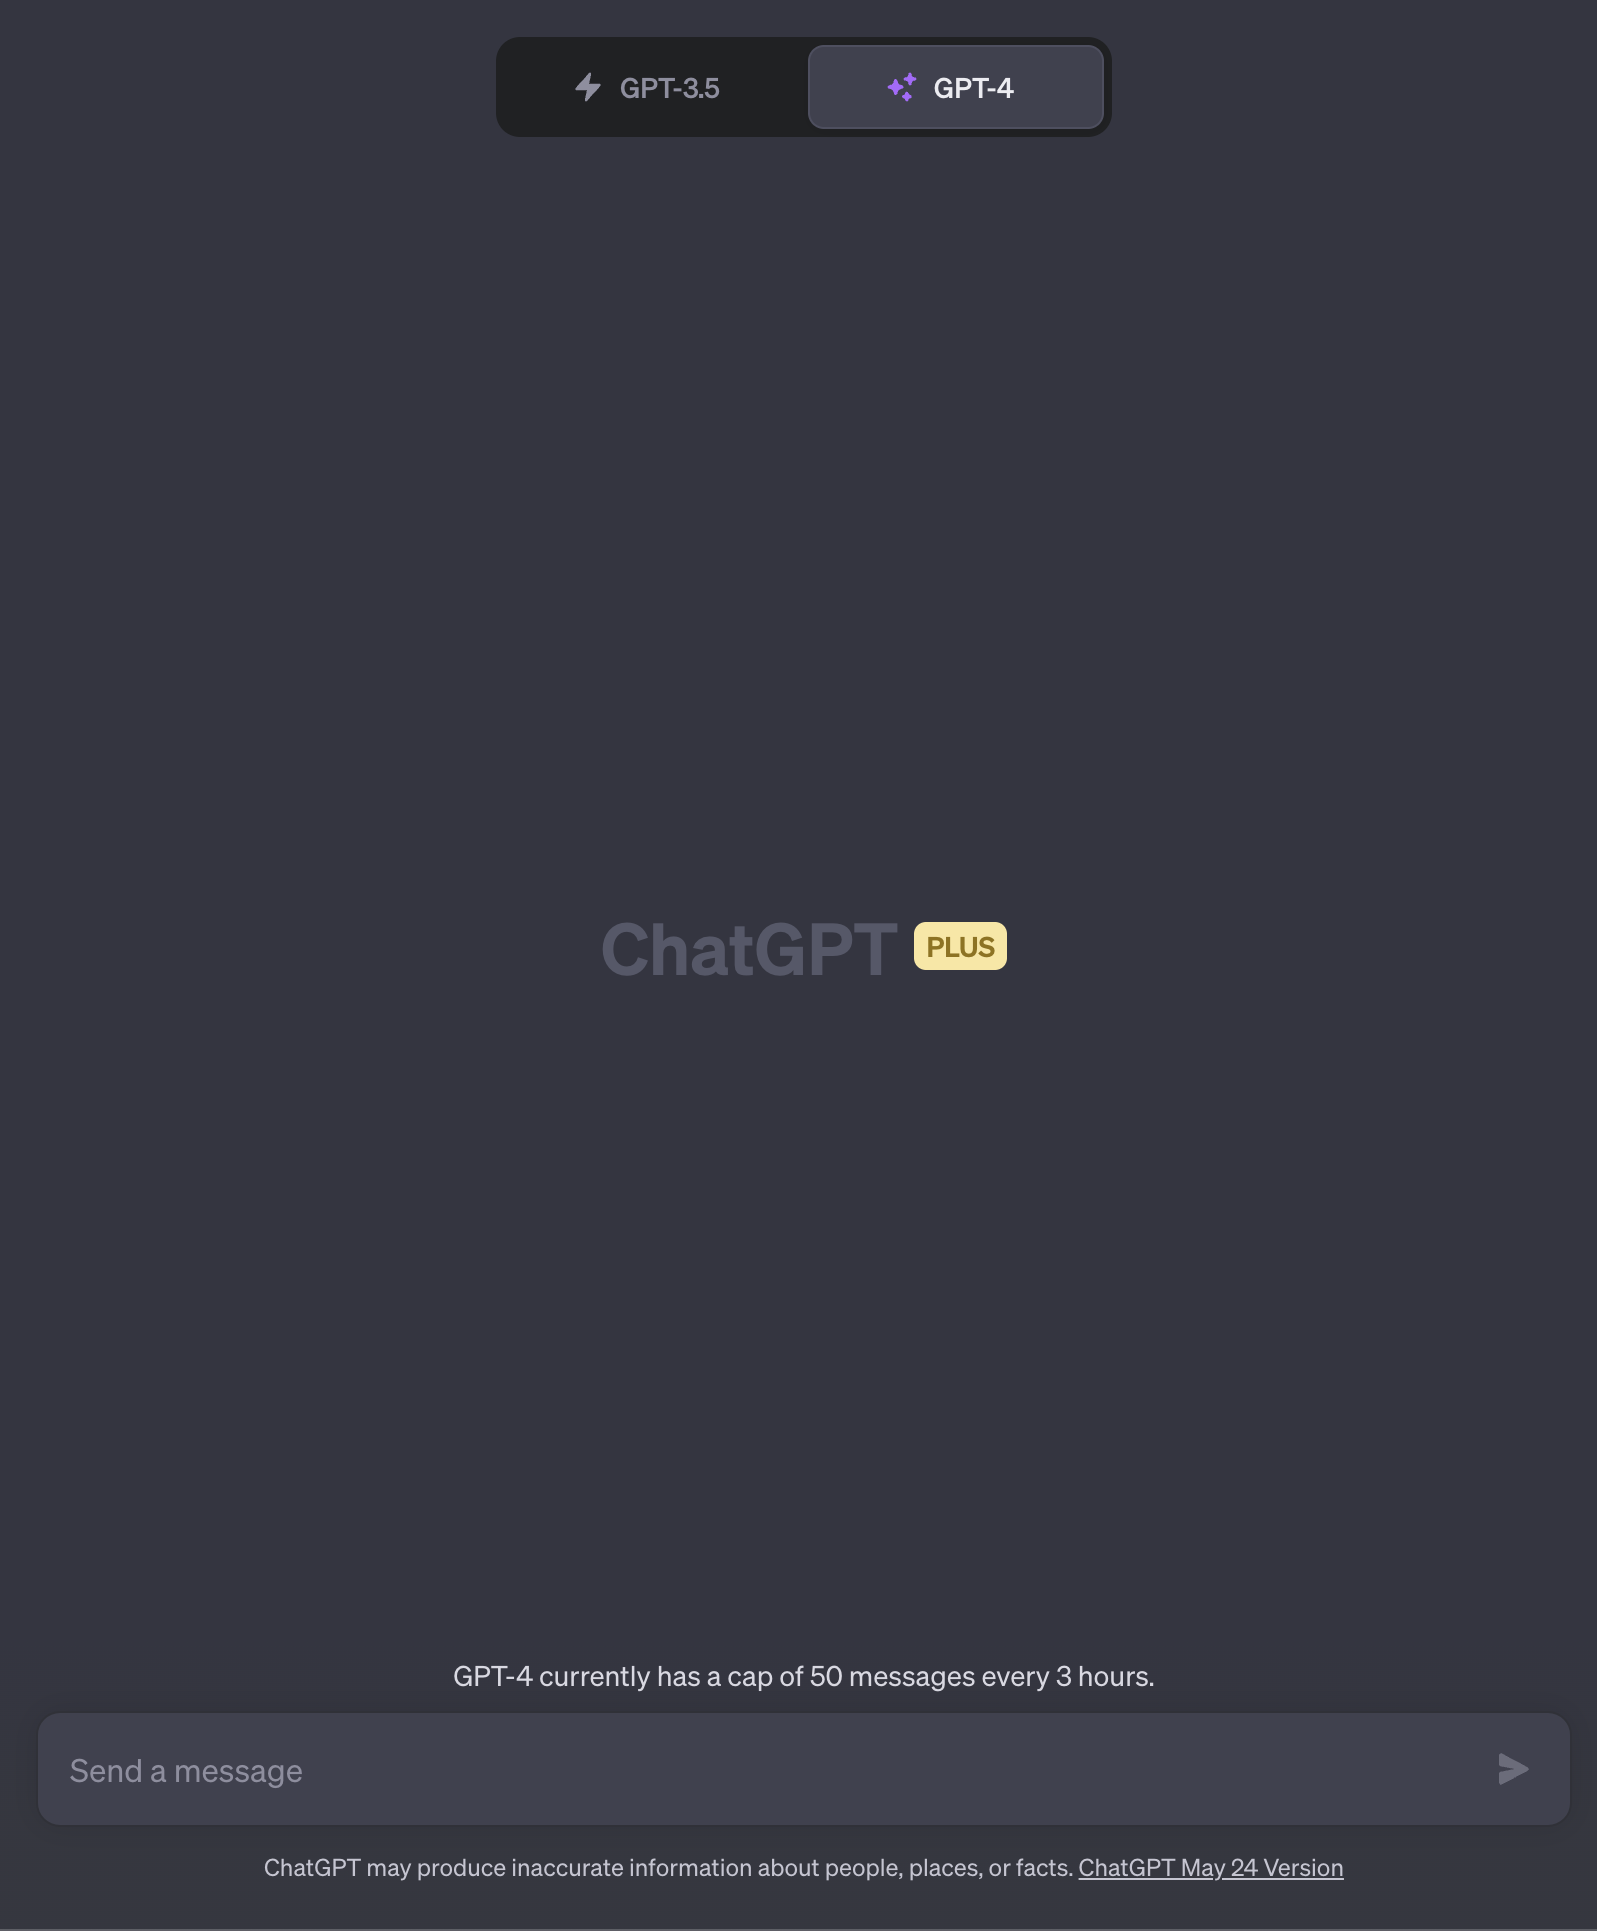 OpenAI increases the GPT 4 message cap to 50 for ChatGPT Plus users